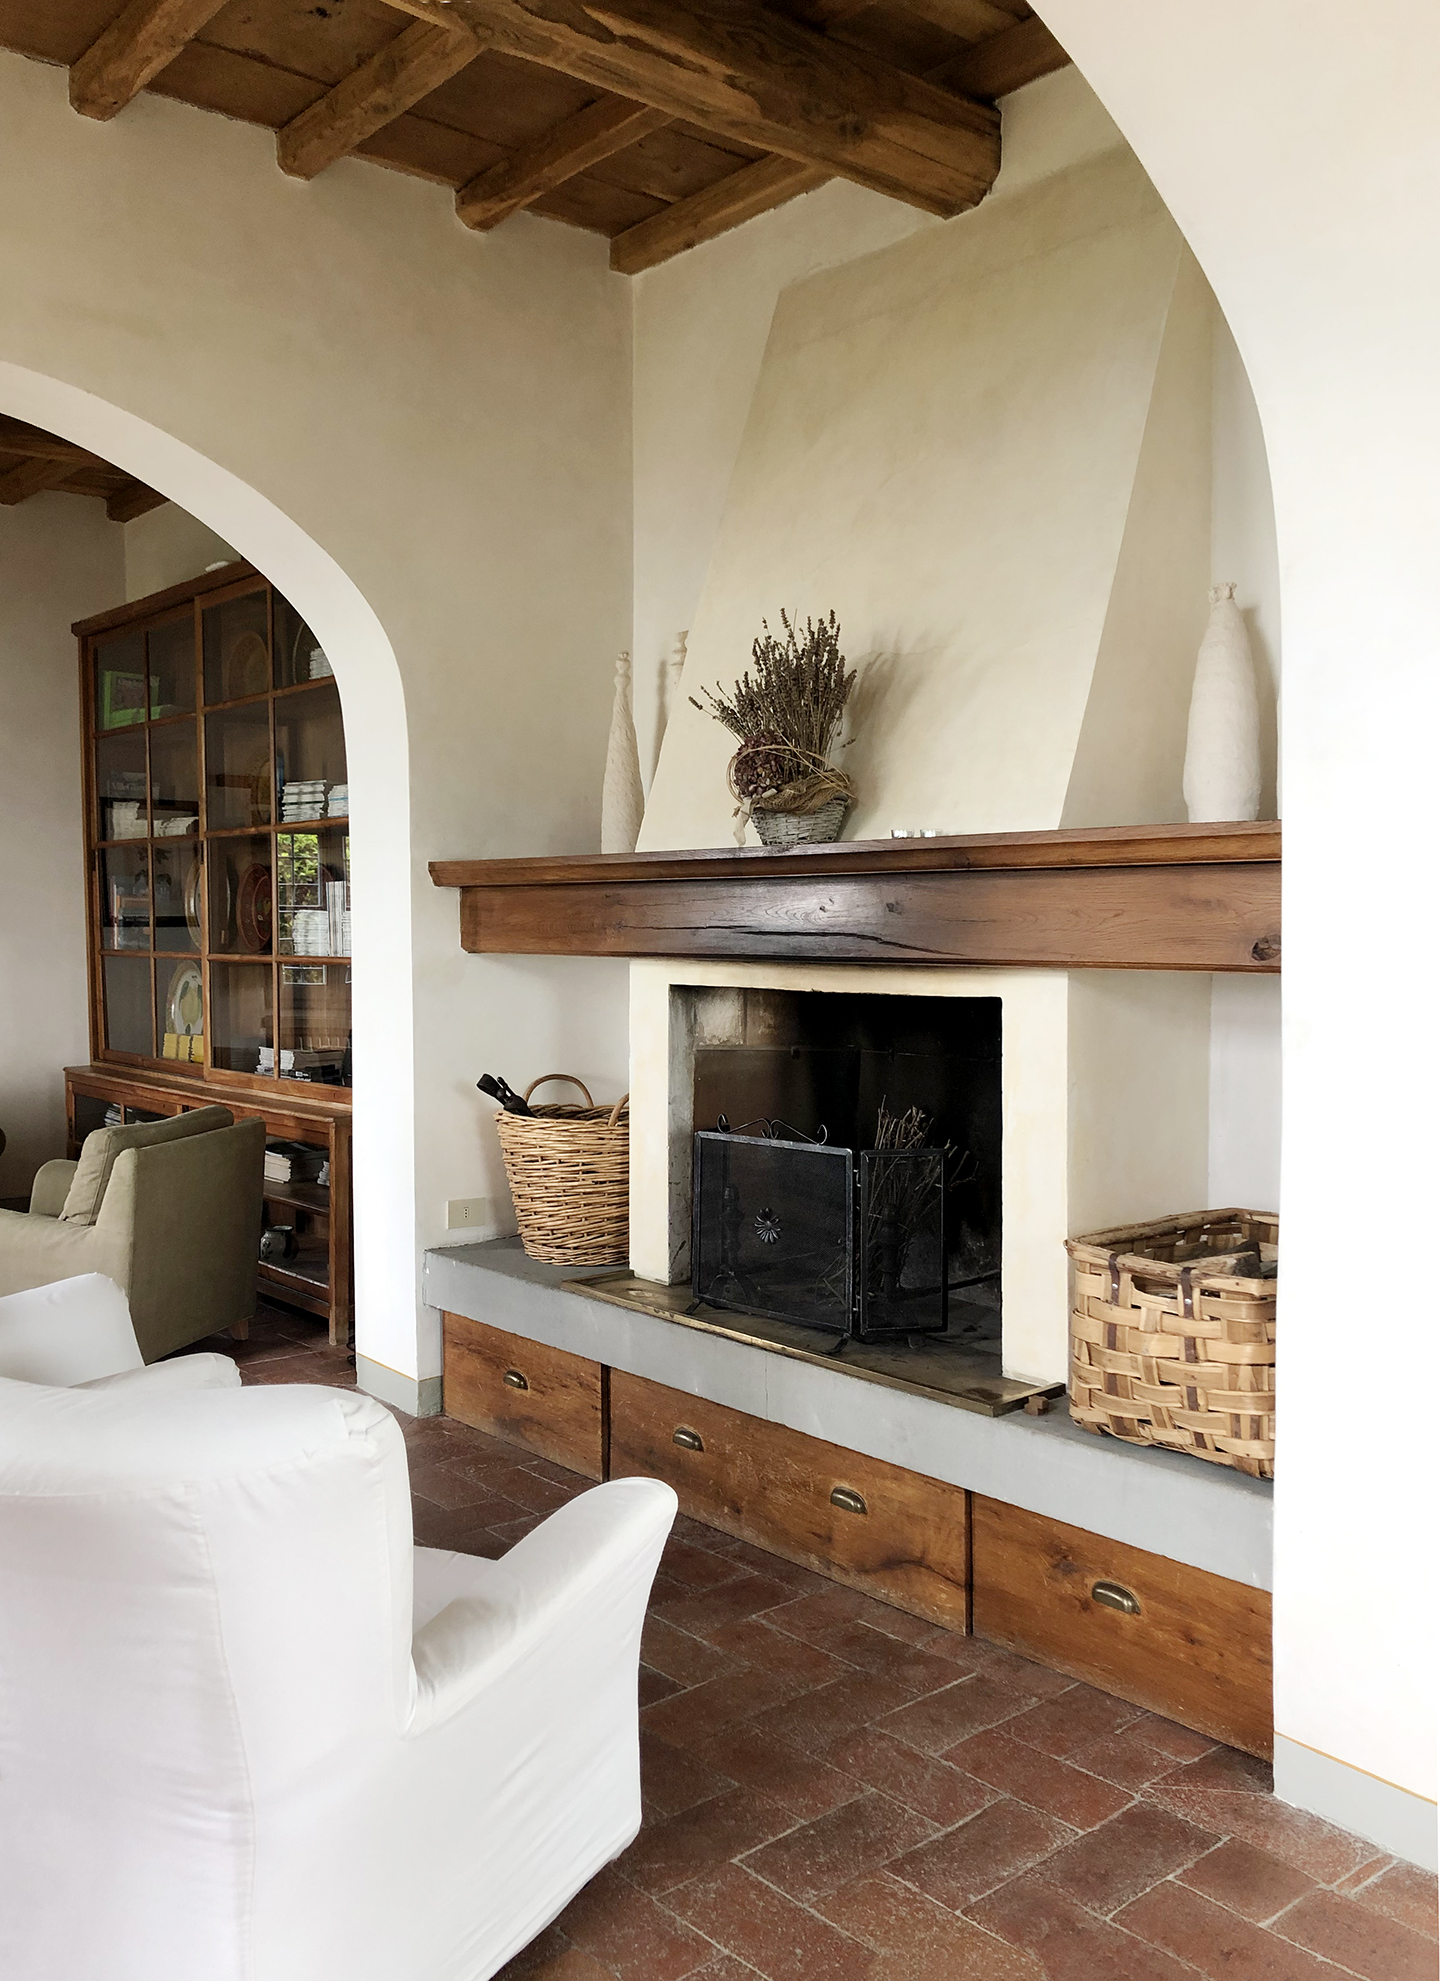 Step inside the Airbnb of your dreams! Inspiring Neutral Decor In The Mountains of Tuscany /// By Design Fixation #italy #neutral #decor